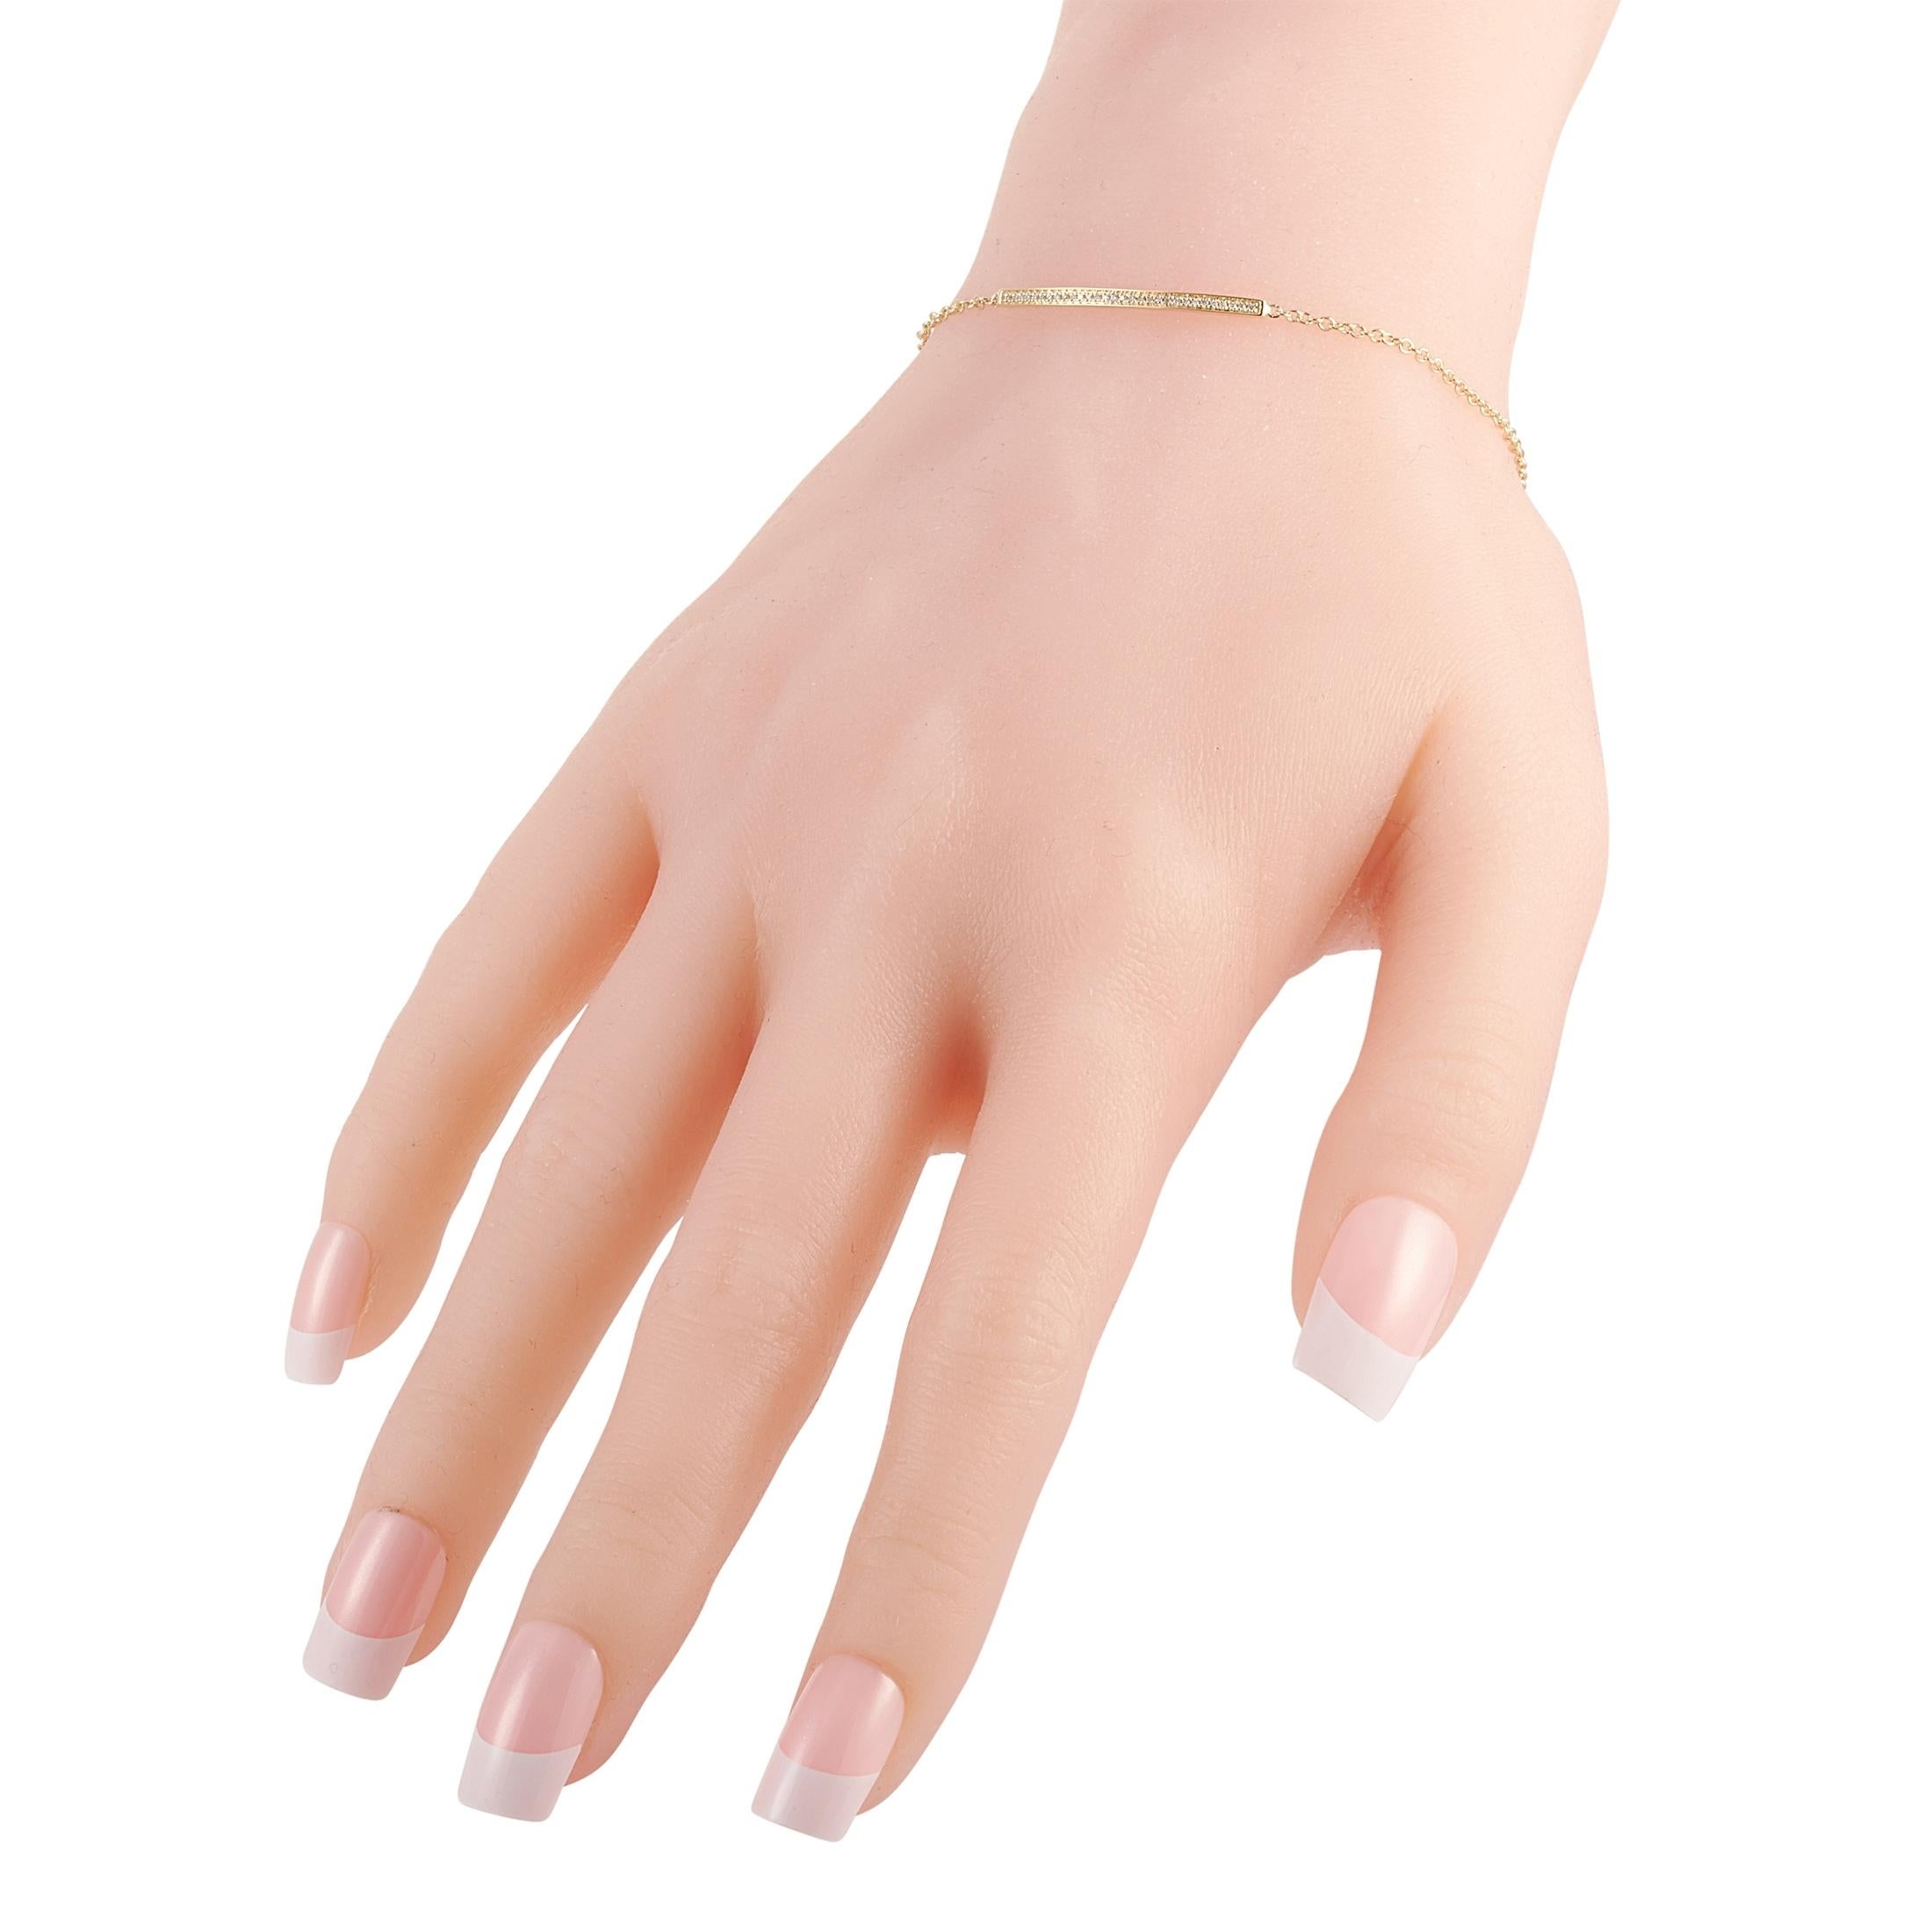 This LB Exclusive bracelet is crafted from 14K yellow gold and weighs 1.9 grams, measuring 6.50” in length. The bracelet is set with diamonds that total 0.10 carats.
 
 Offered in brand new condition, this item includes a gift box.
